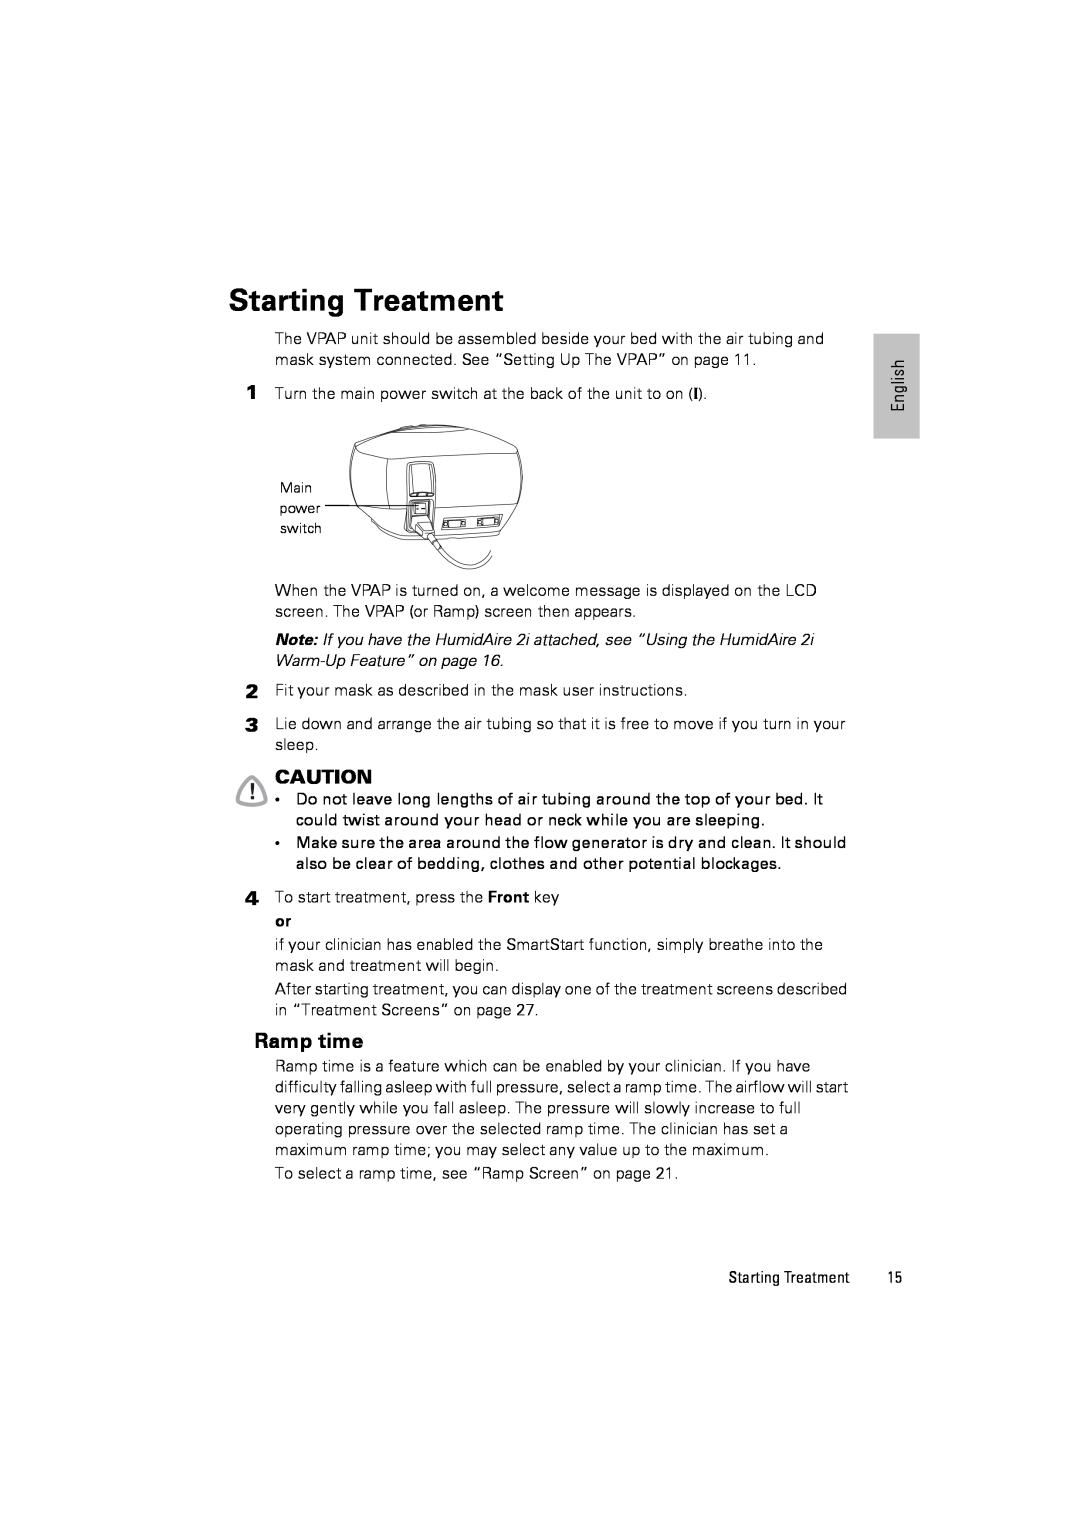 ResMed III & III ST user manual Starting Treatment, Ramp time 